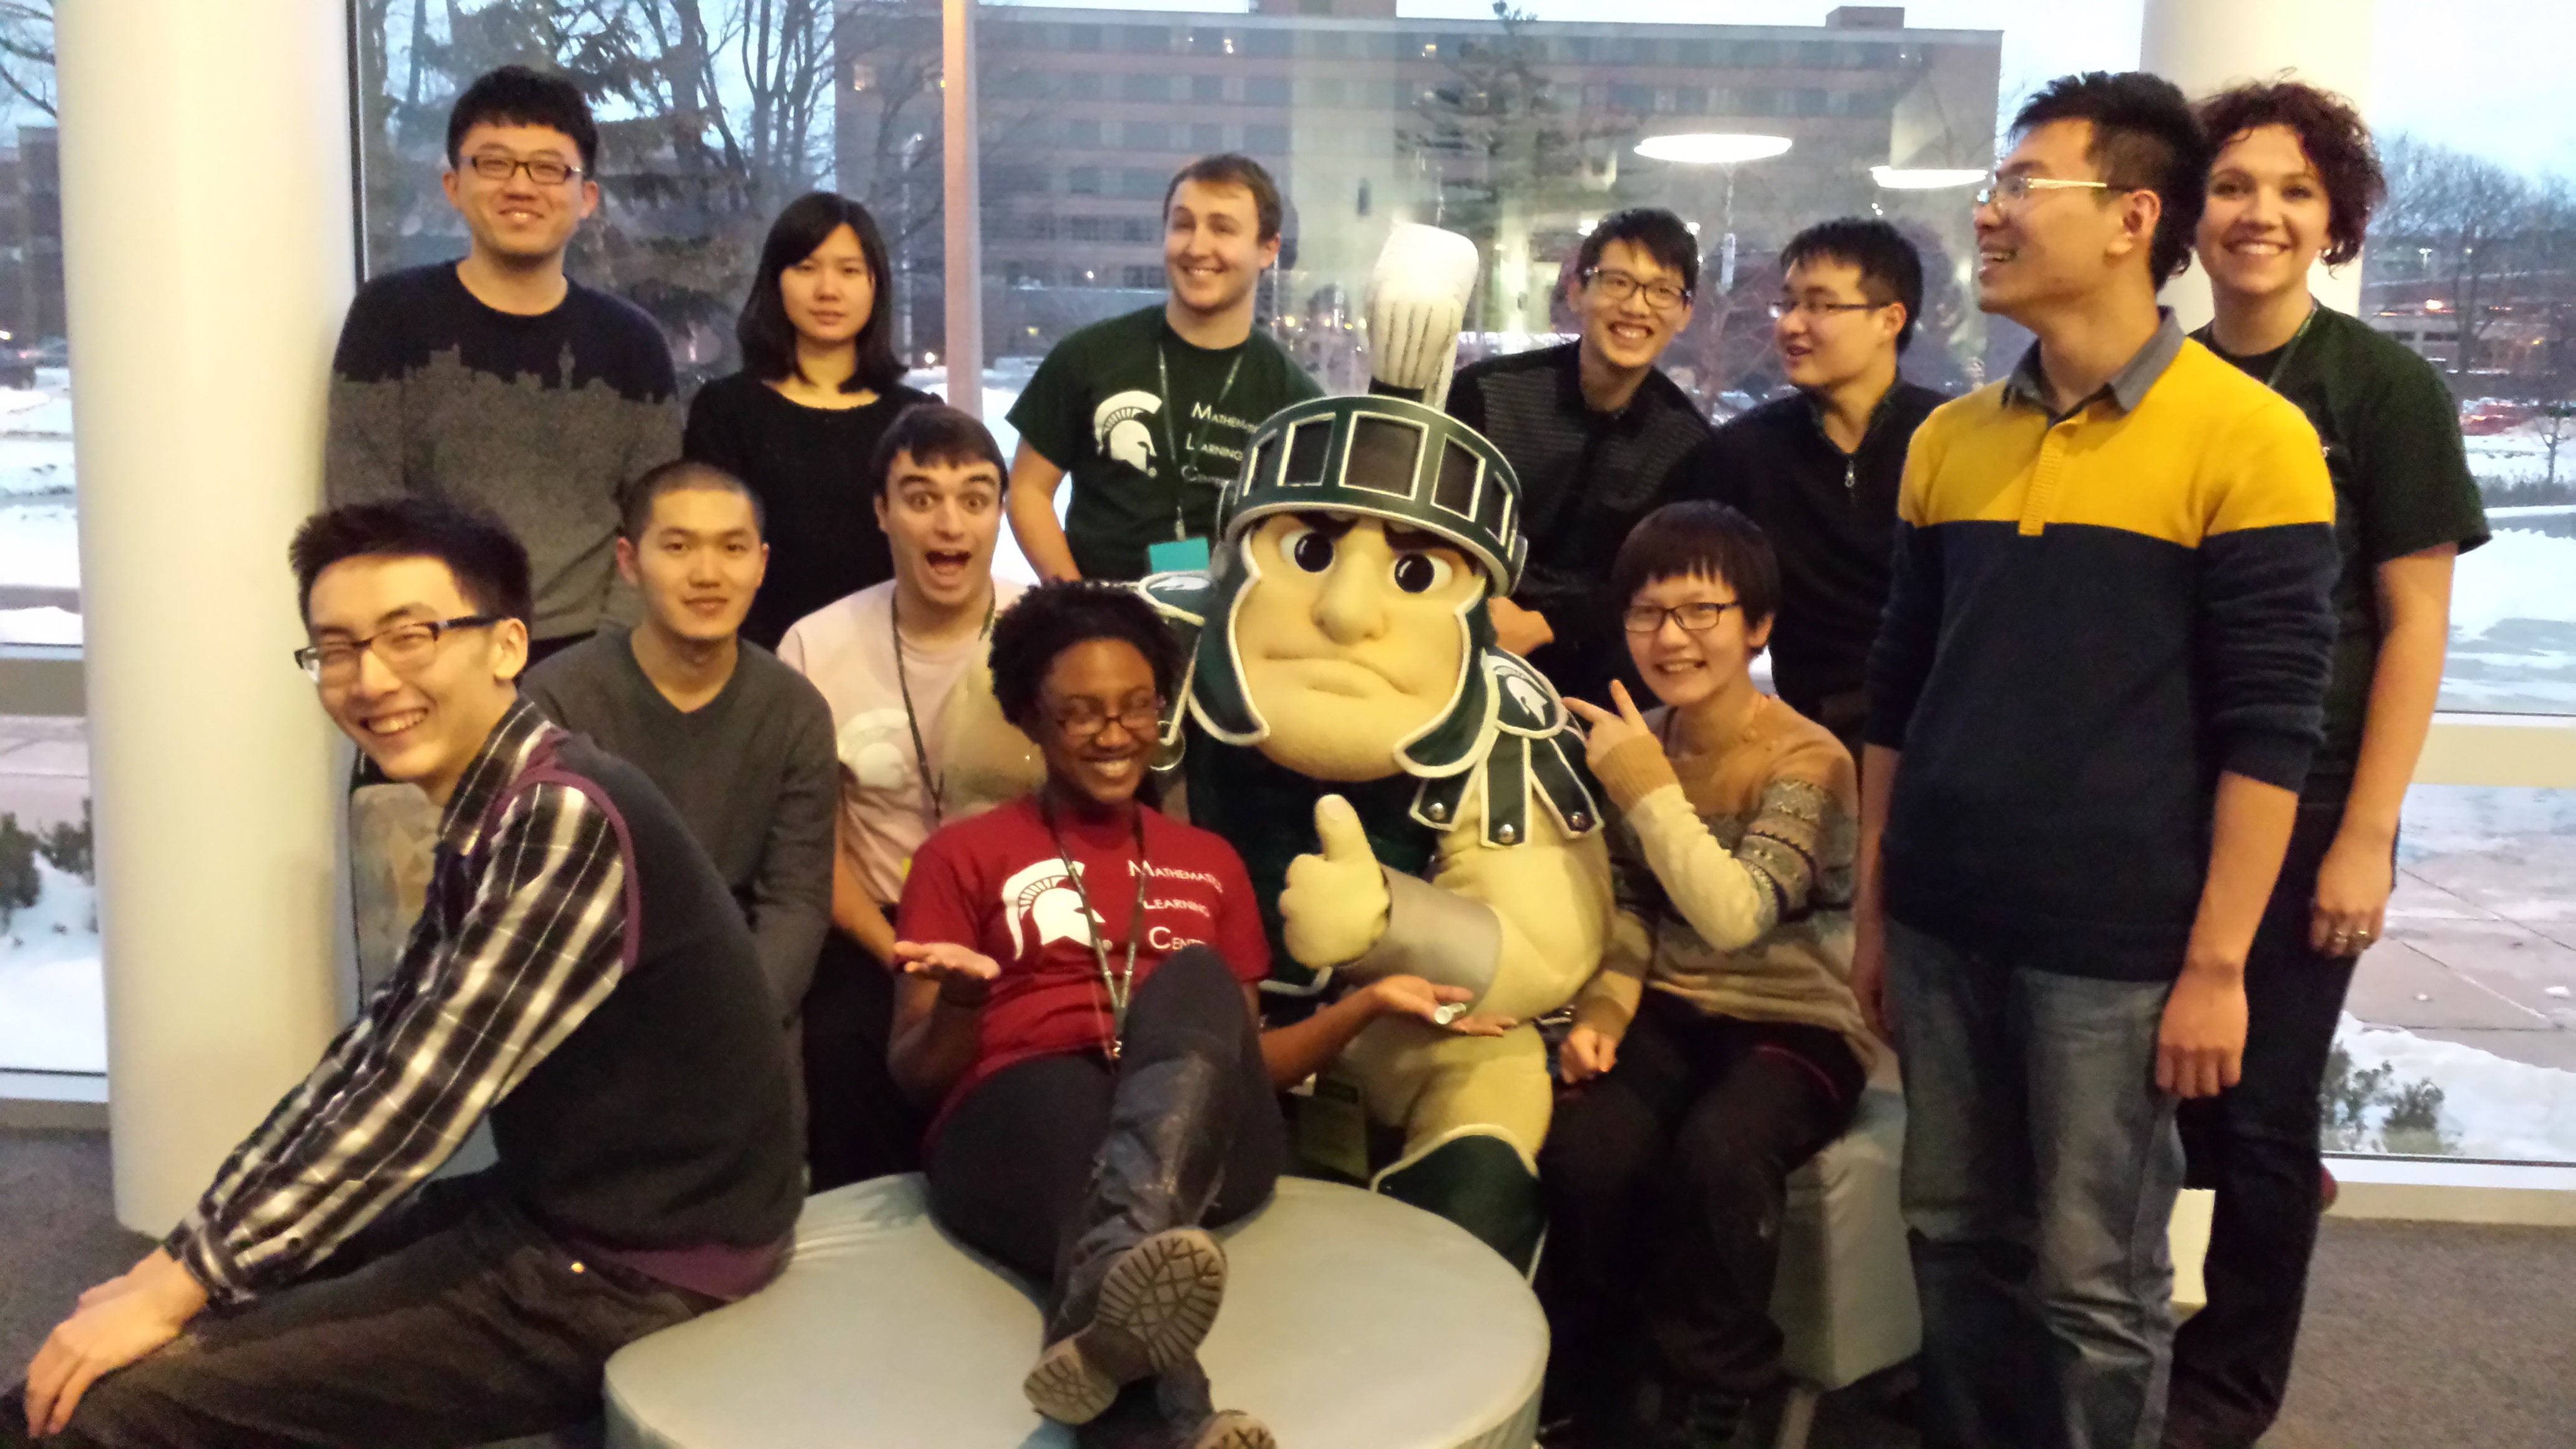 Students posing for photo around the Sparty mascot